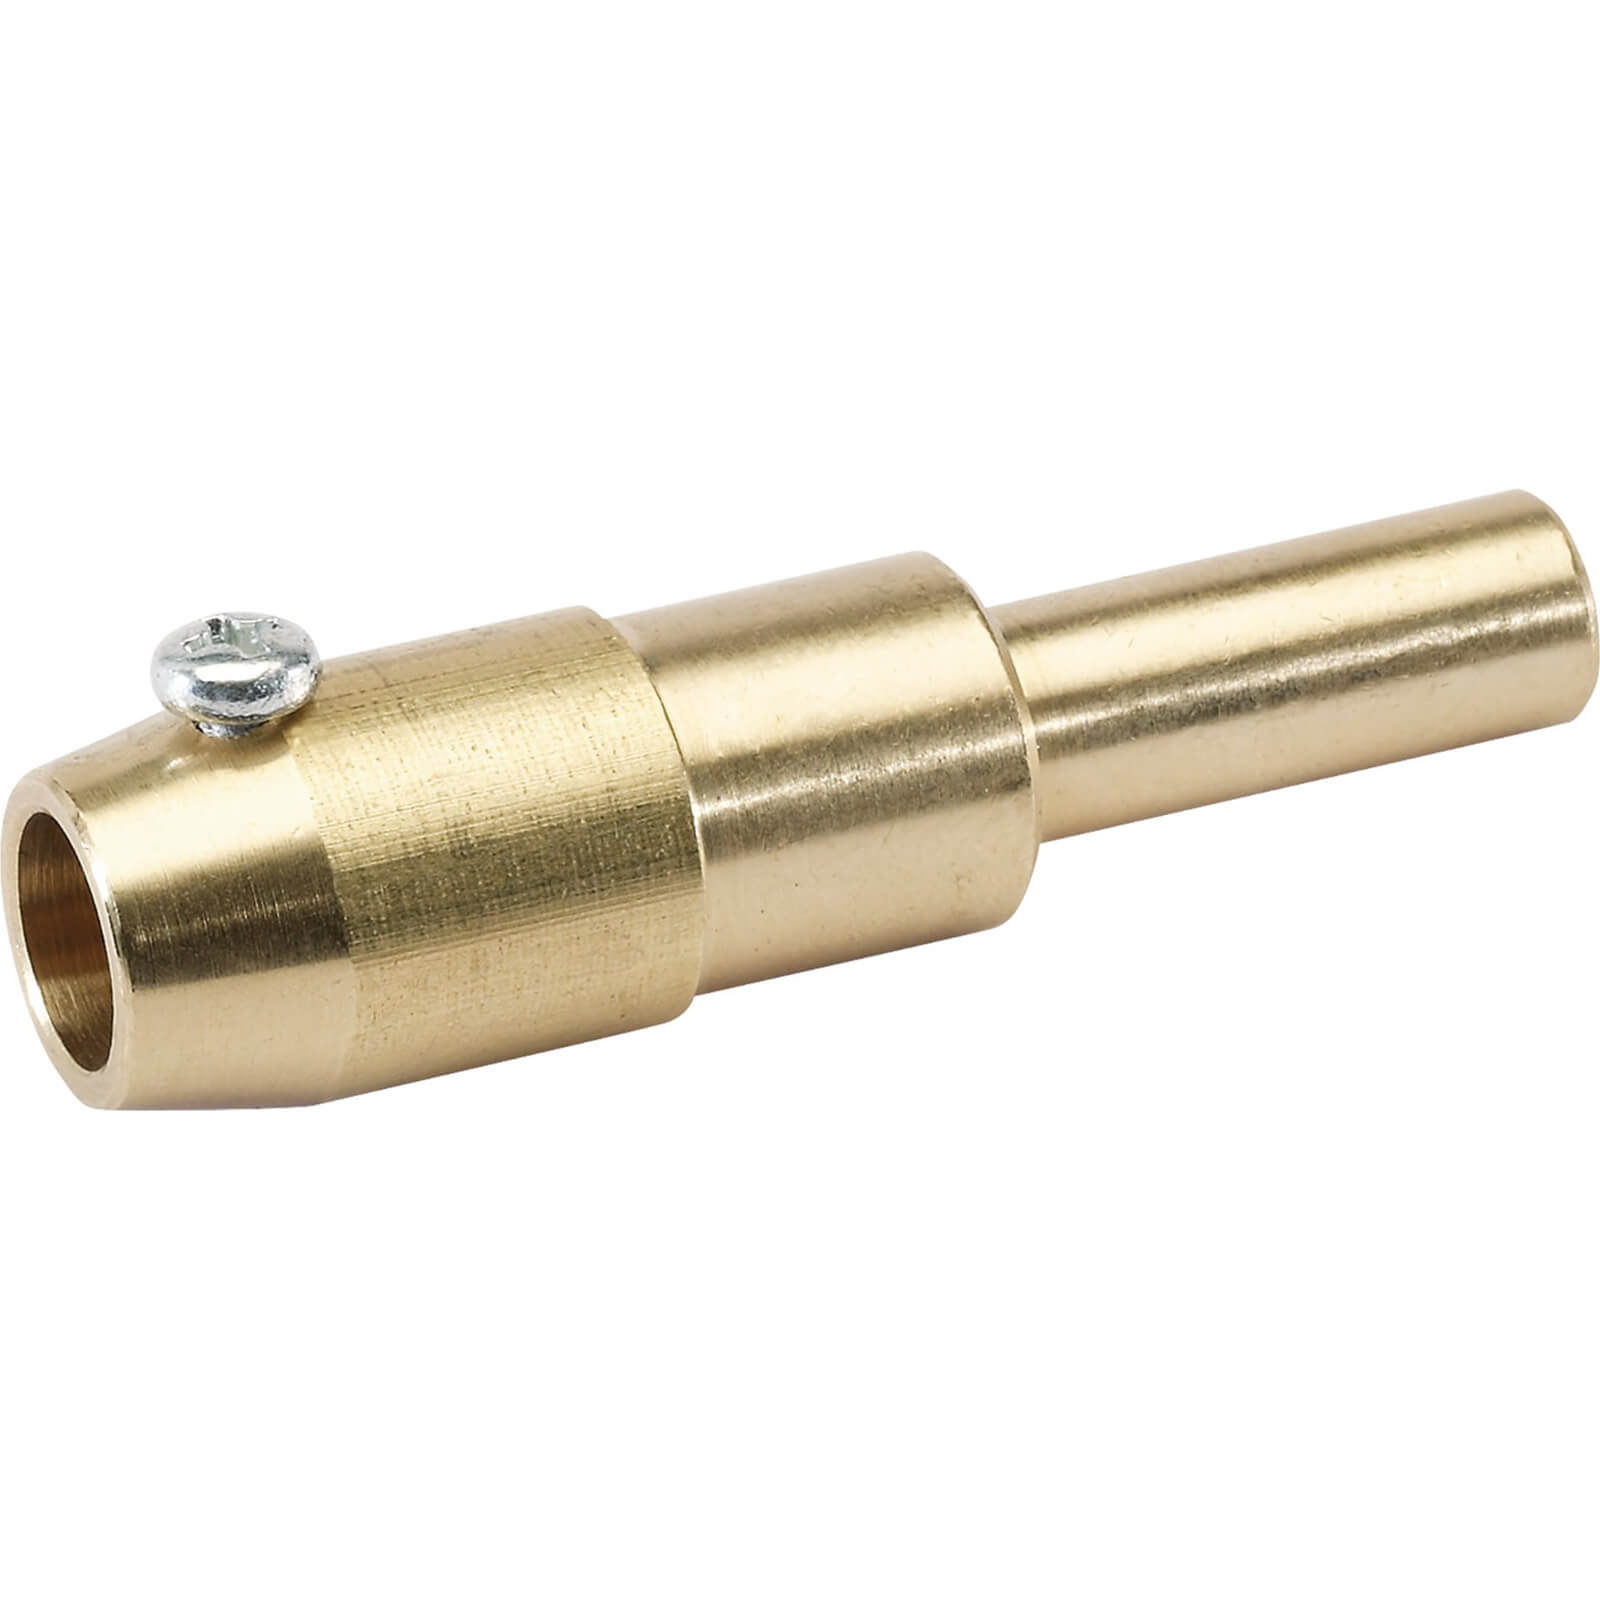 Photo of Draper Carbon Rod Connector For 71106 Stud Welder